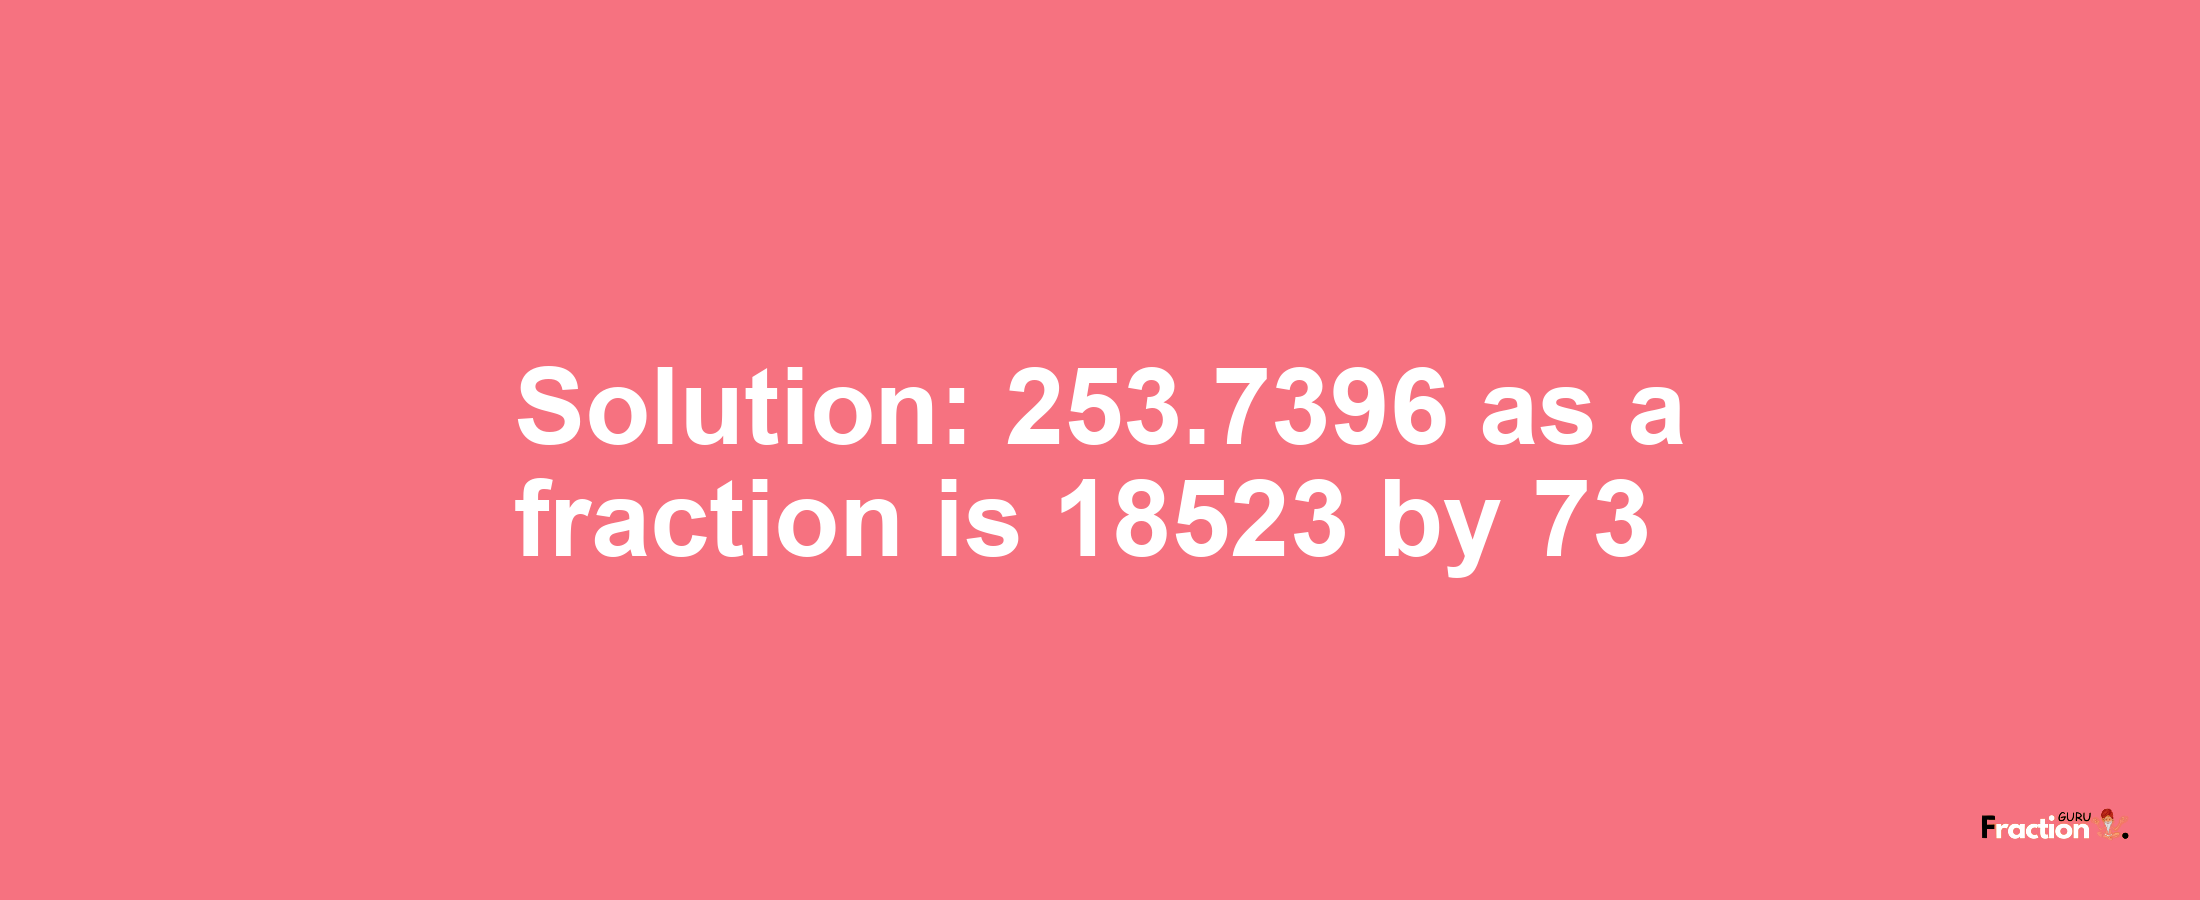 Solution:253.7396 as a fraction is 18523/73